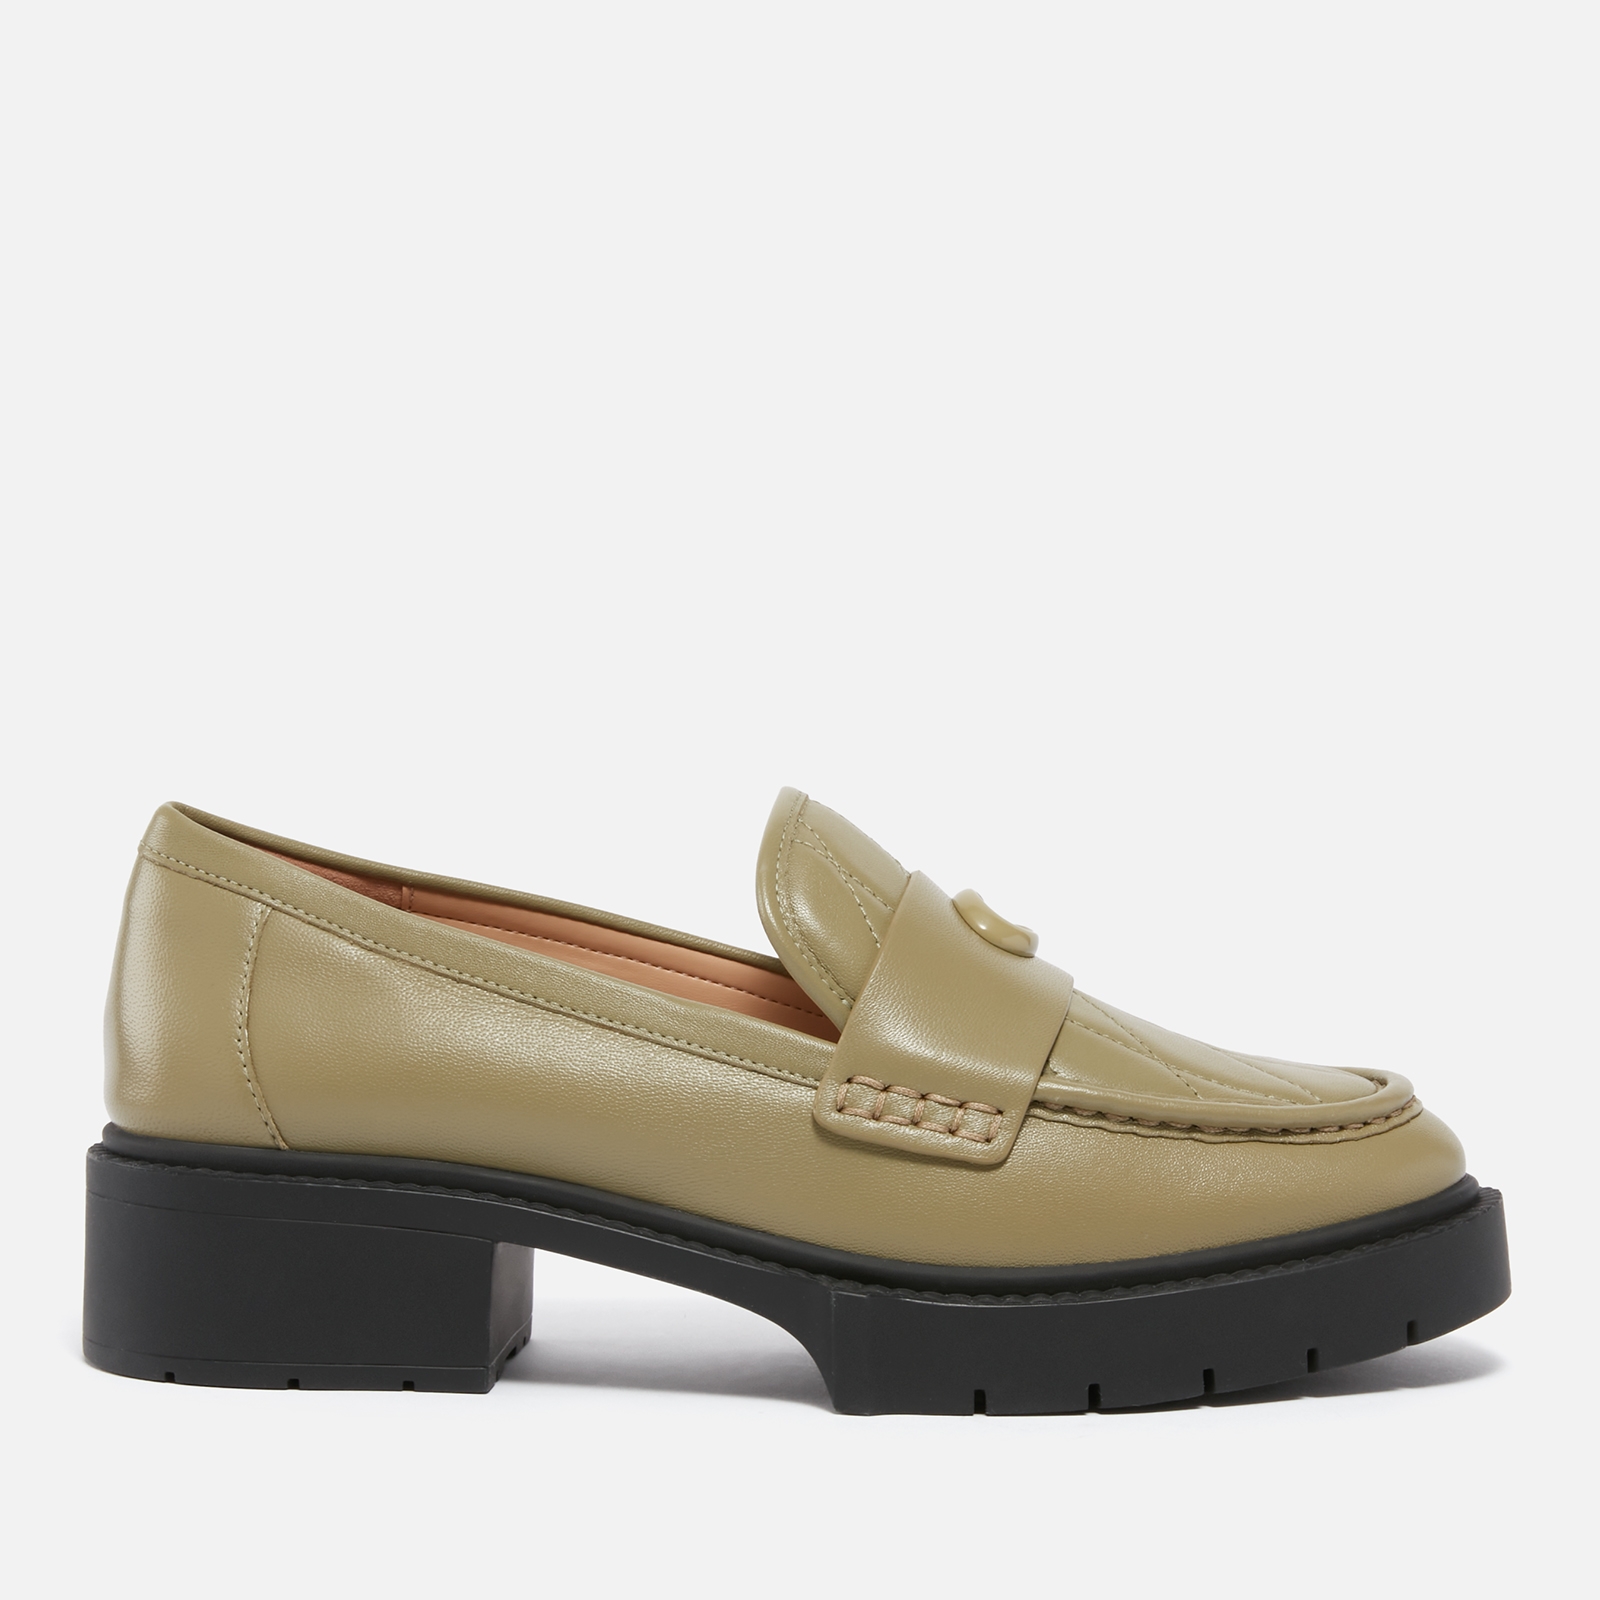 Coach Women's Leah Quilted Leather Loafers - UK 4 von Coach